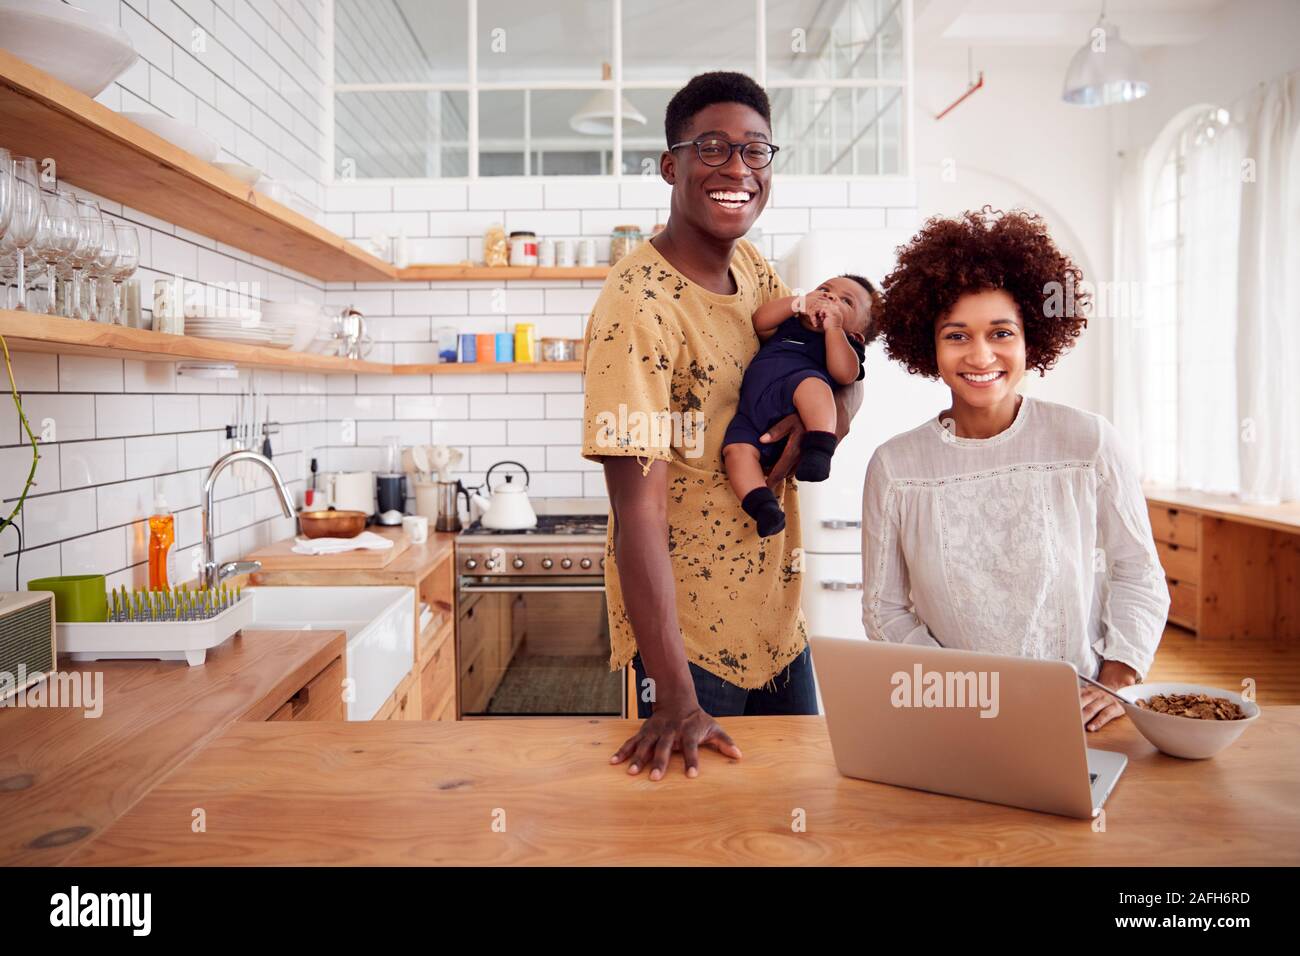 Portrait Of Busy Family In Kitchen At Breakfast With Father Caring For Baby Son Stock Photo